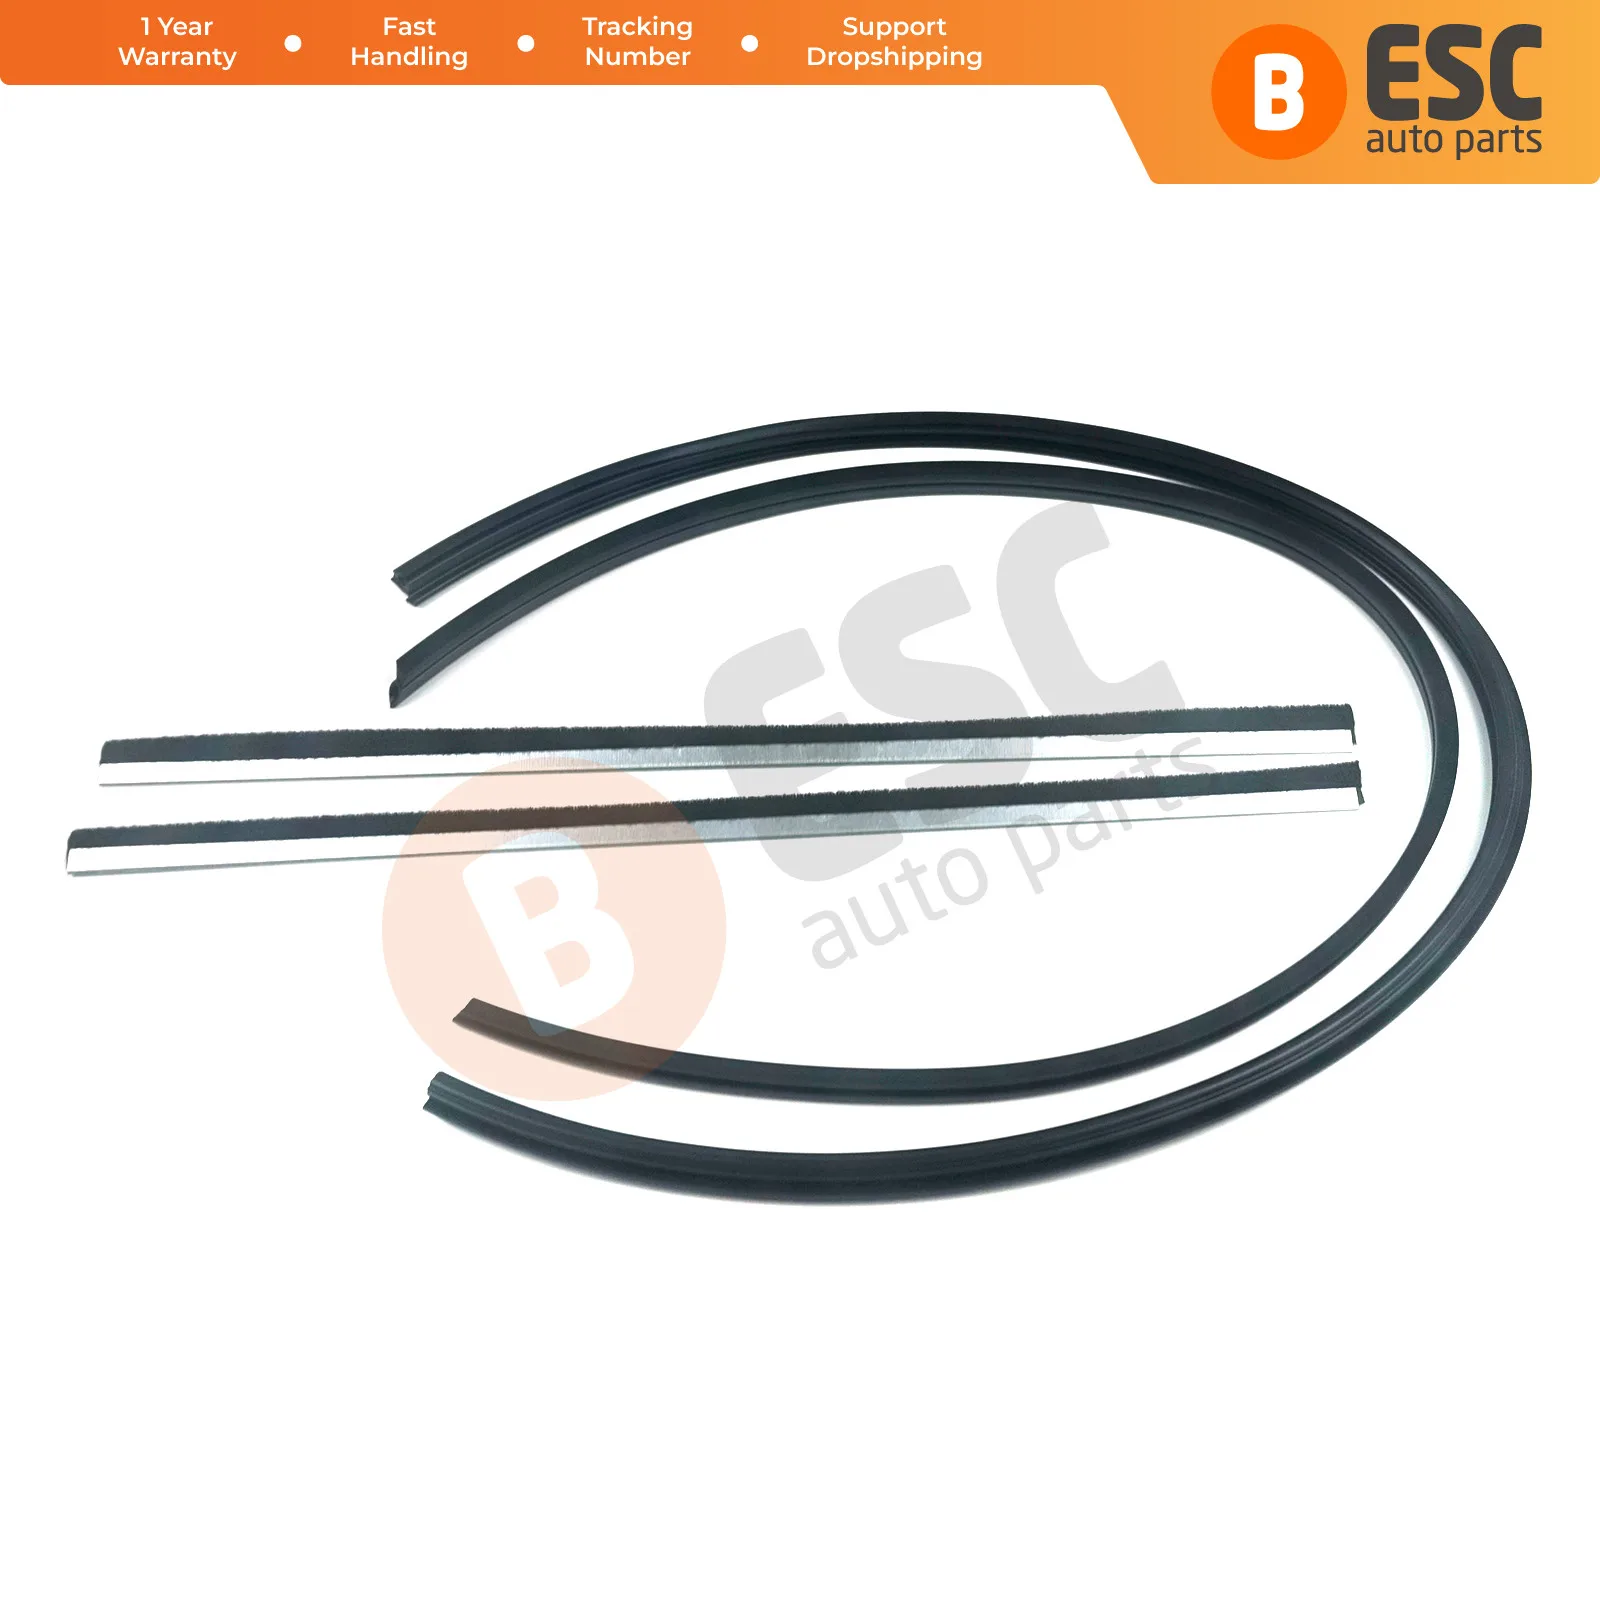 

ESC Auto Parts ESR534 Sunroof Rubber Seal Gasket Set for Mercedes W108 109 114 115 116 123 126 Fast Shipment Ship From Turkey